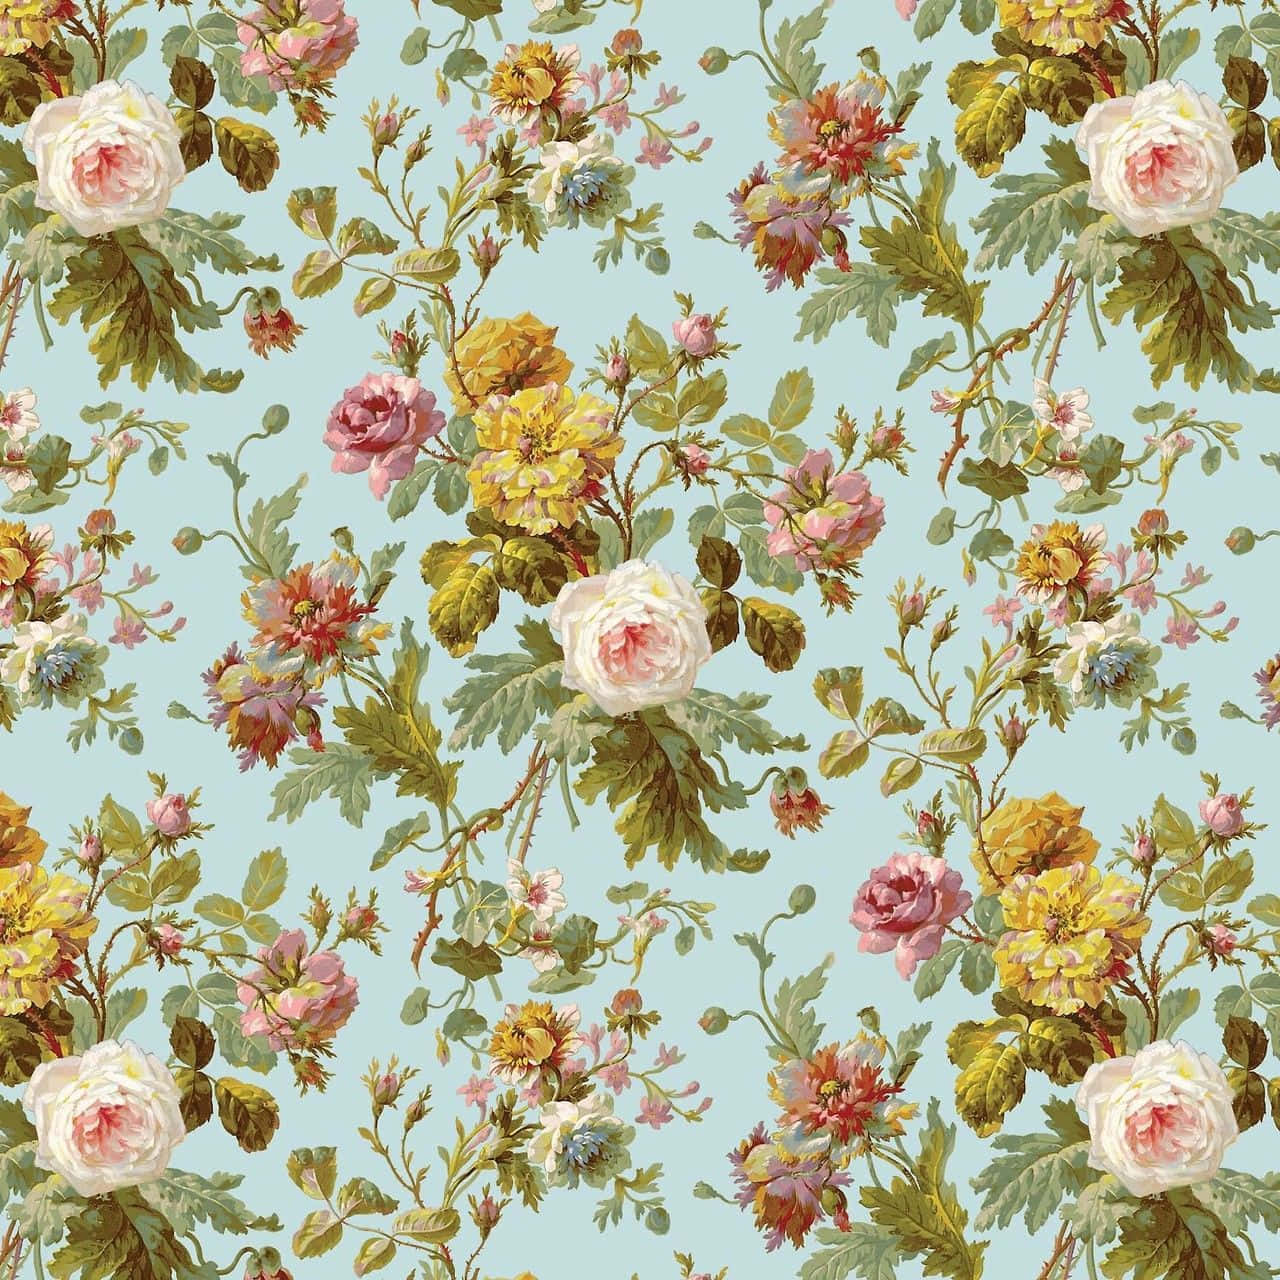 A Floral Wallpaper With Pink And Yellow Flowers